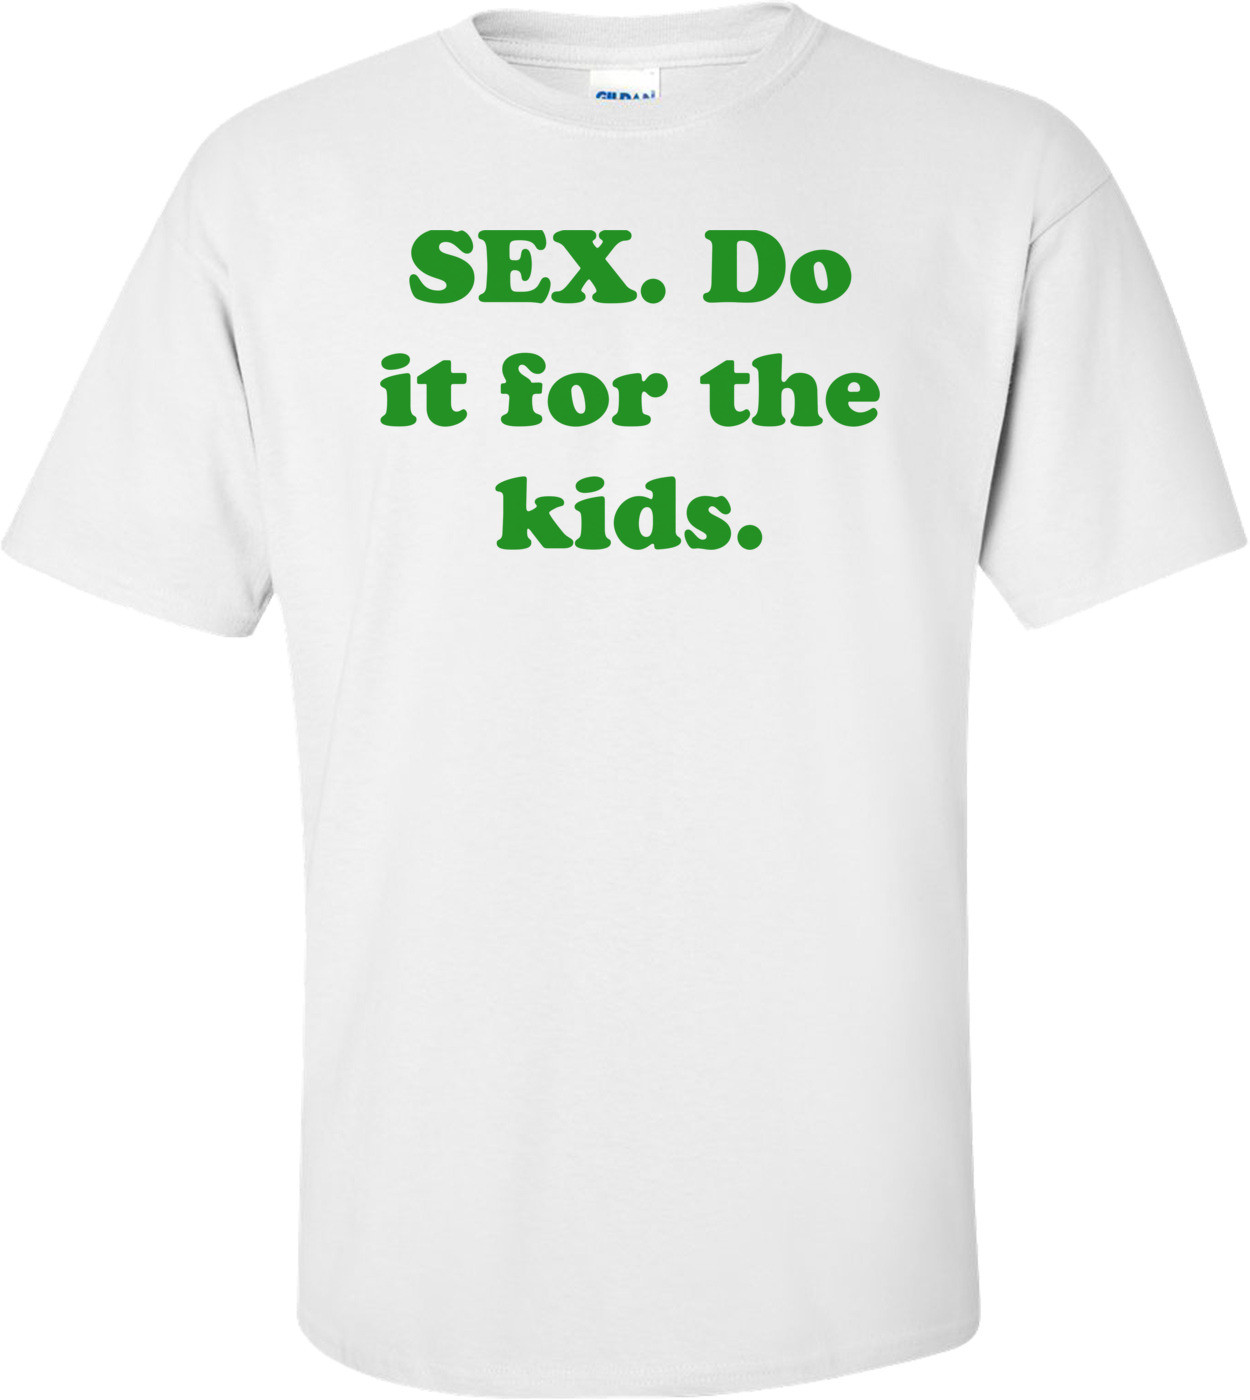 SEX. Do it for the kids. Shirt